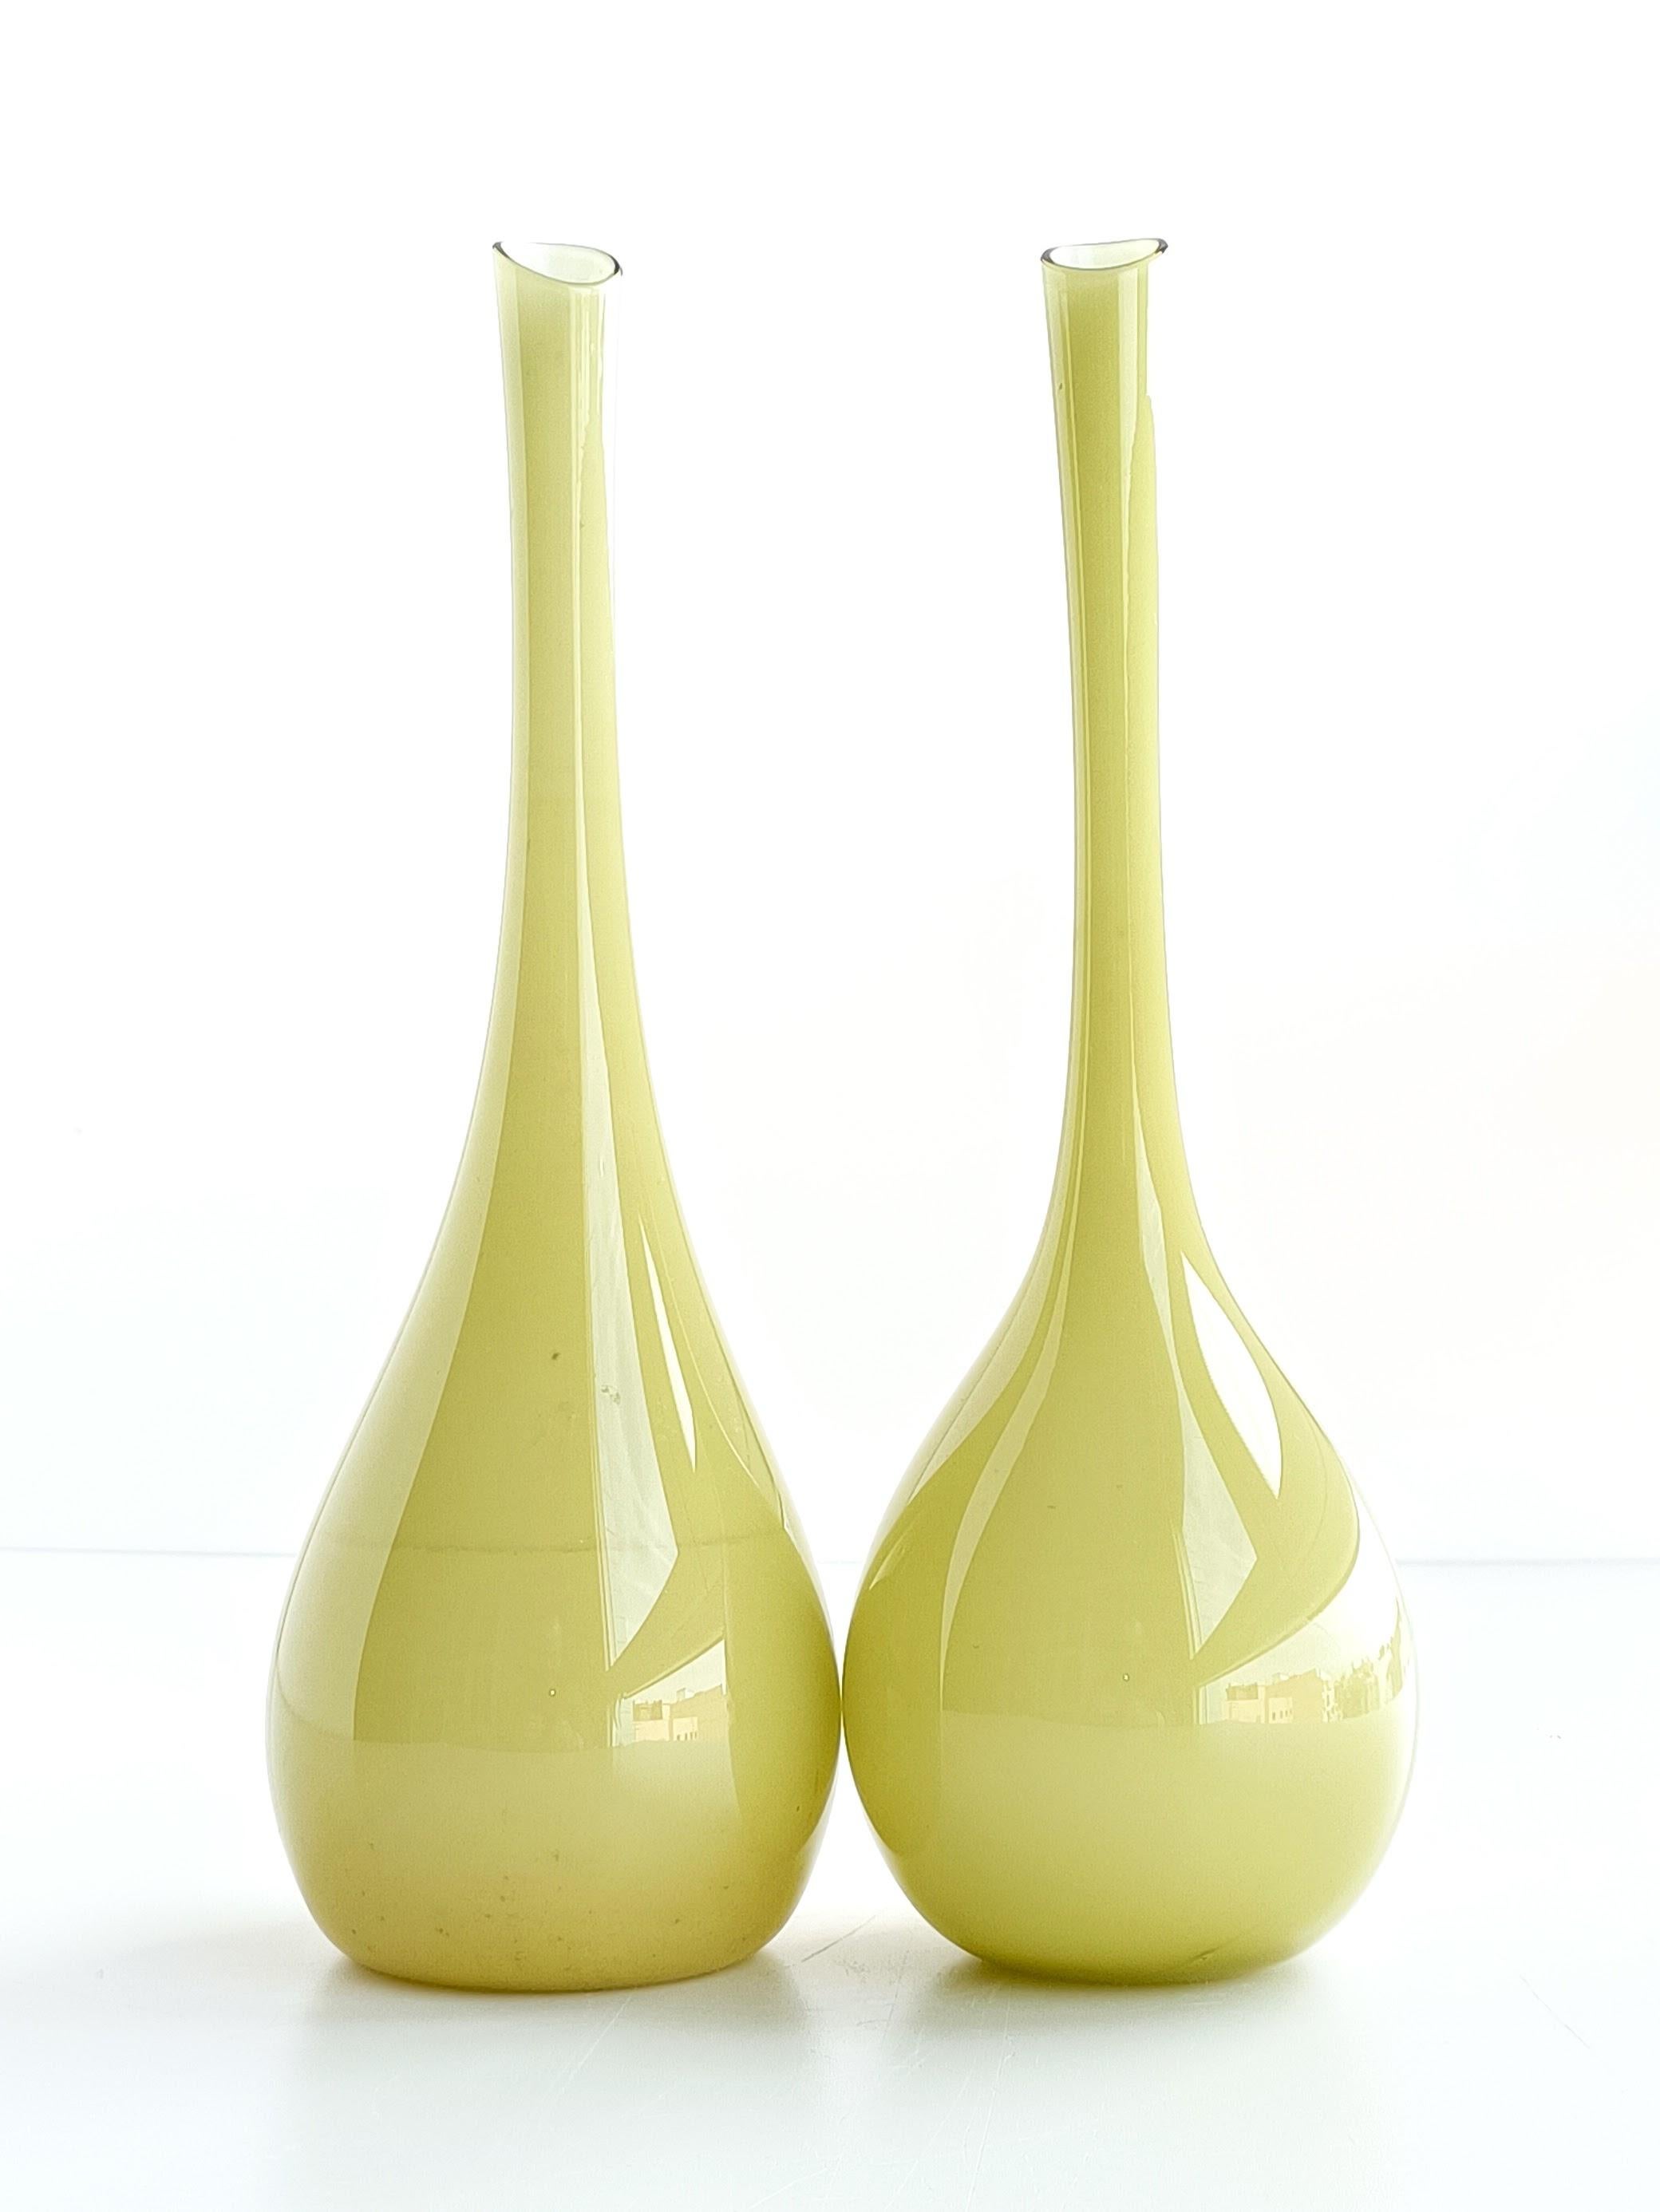 Mid-20th Century Scandinavian Modern by Gunnar Ander for Lindshammar Pair of Glass Vases, 1950s For Sale